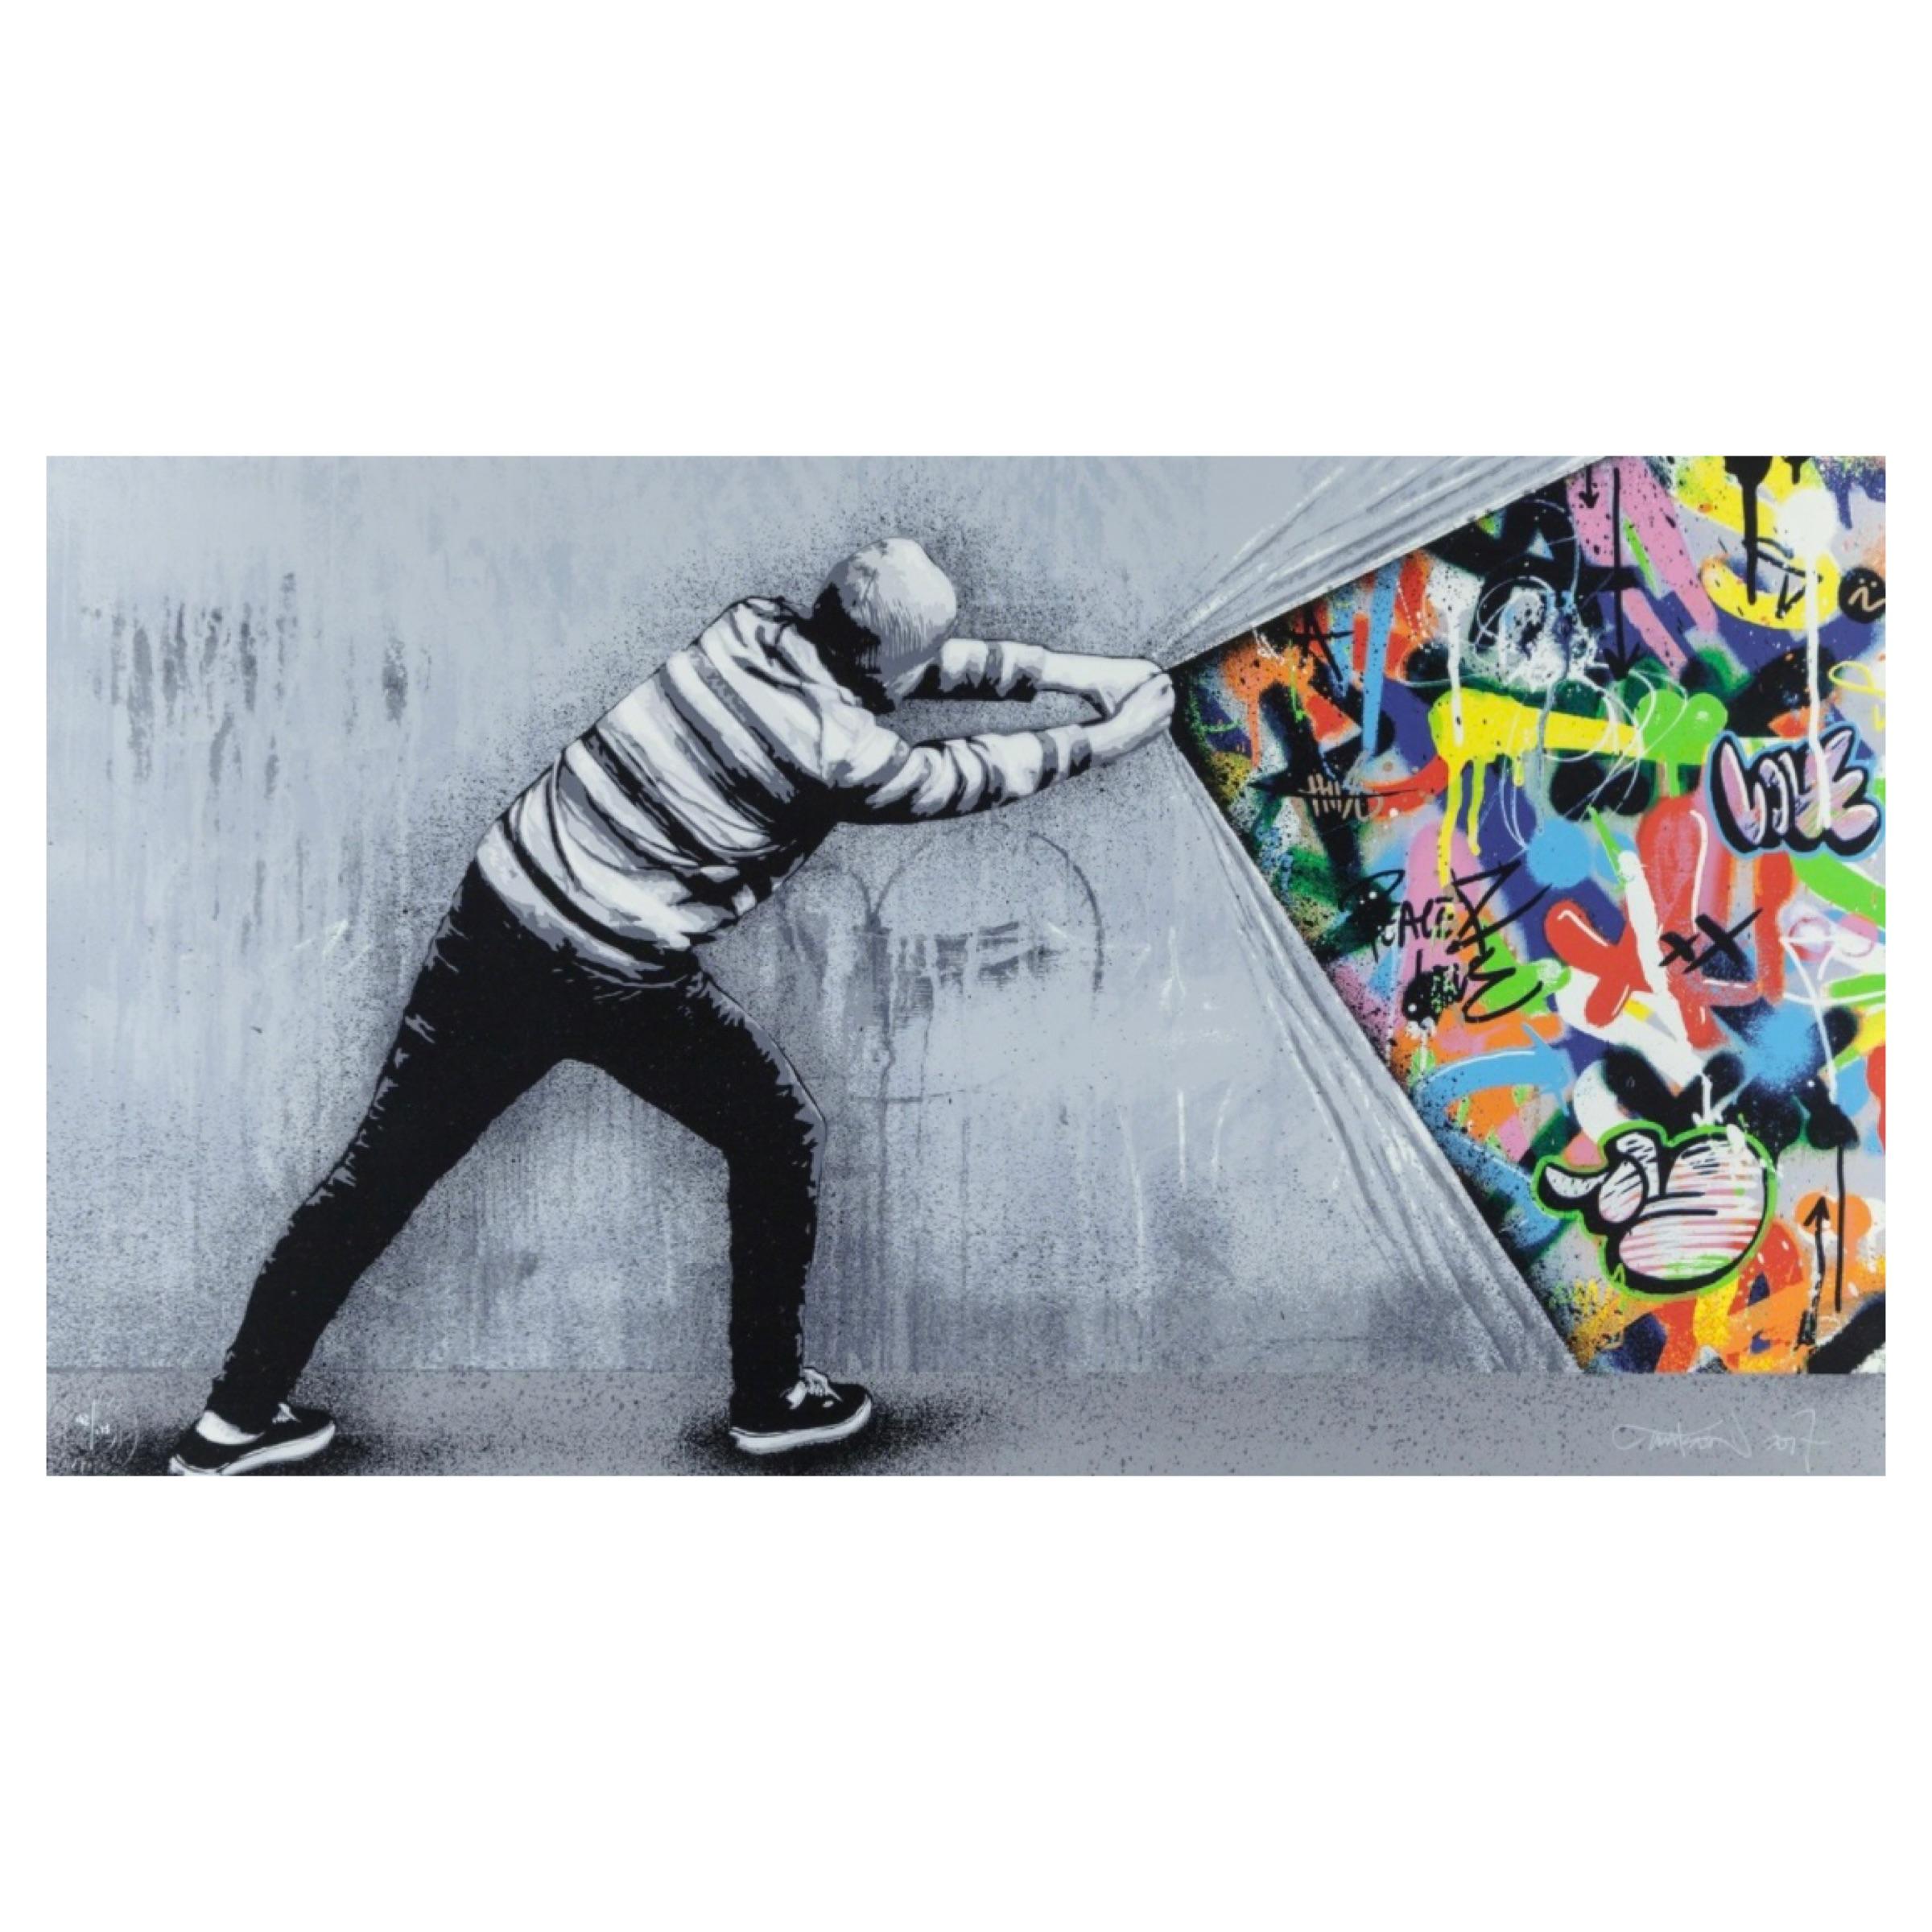 Behind The Curtain Screenprint by Martin Whatson 